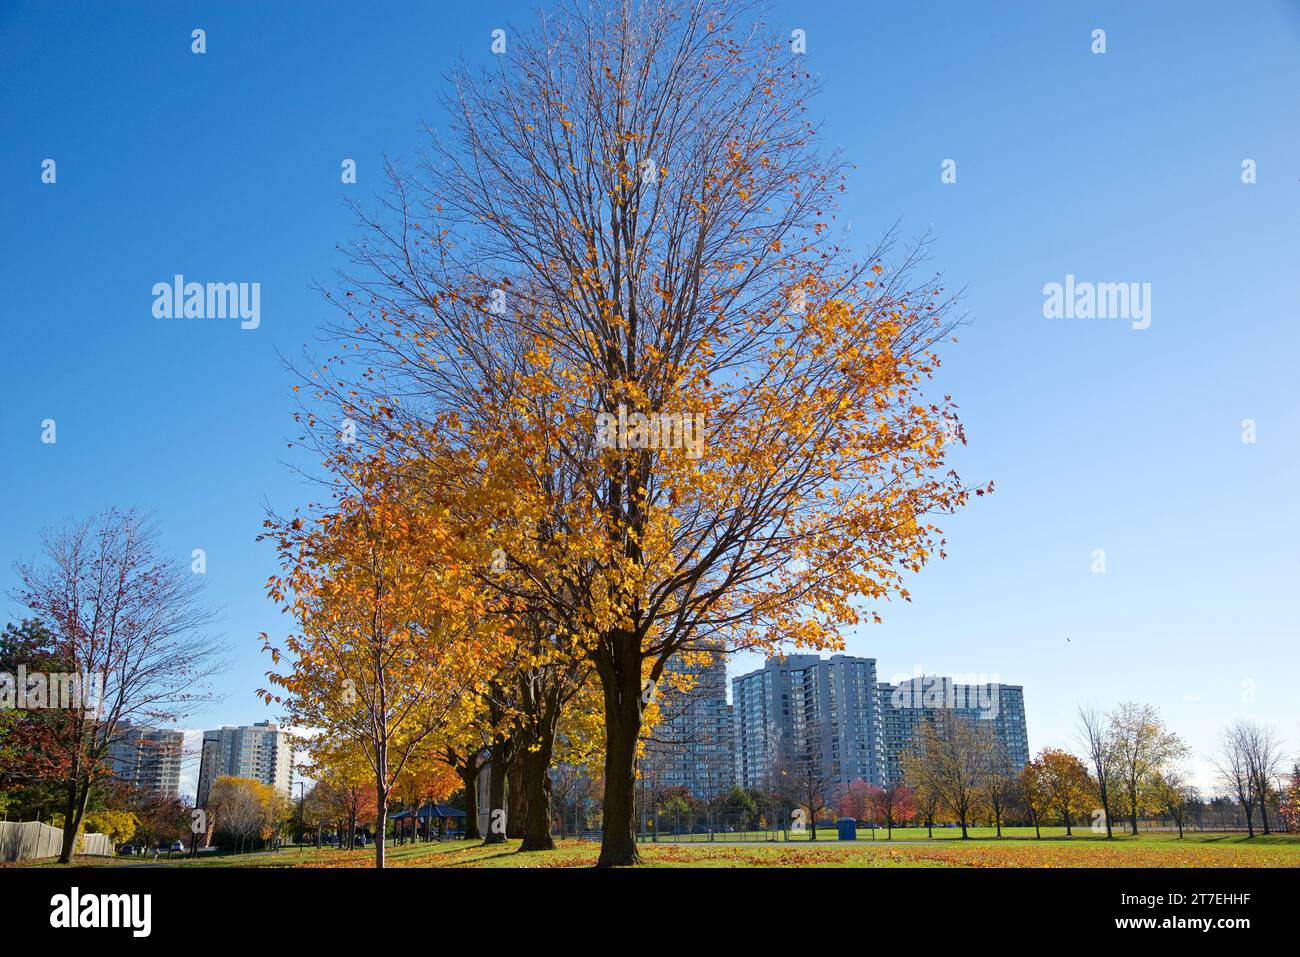 Lifestyle of apartment Living with autumn leaf colour Stock Photo